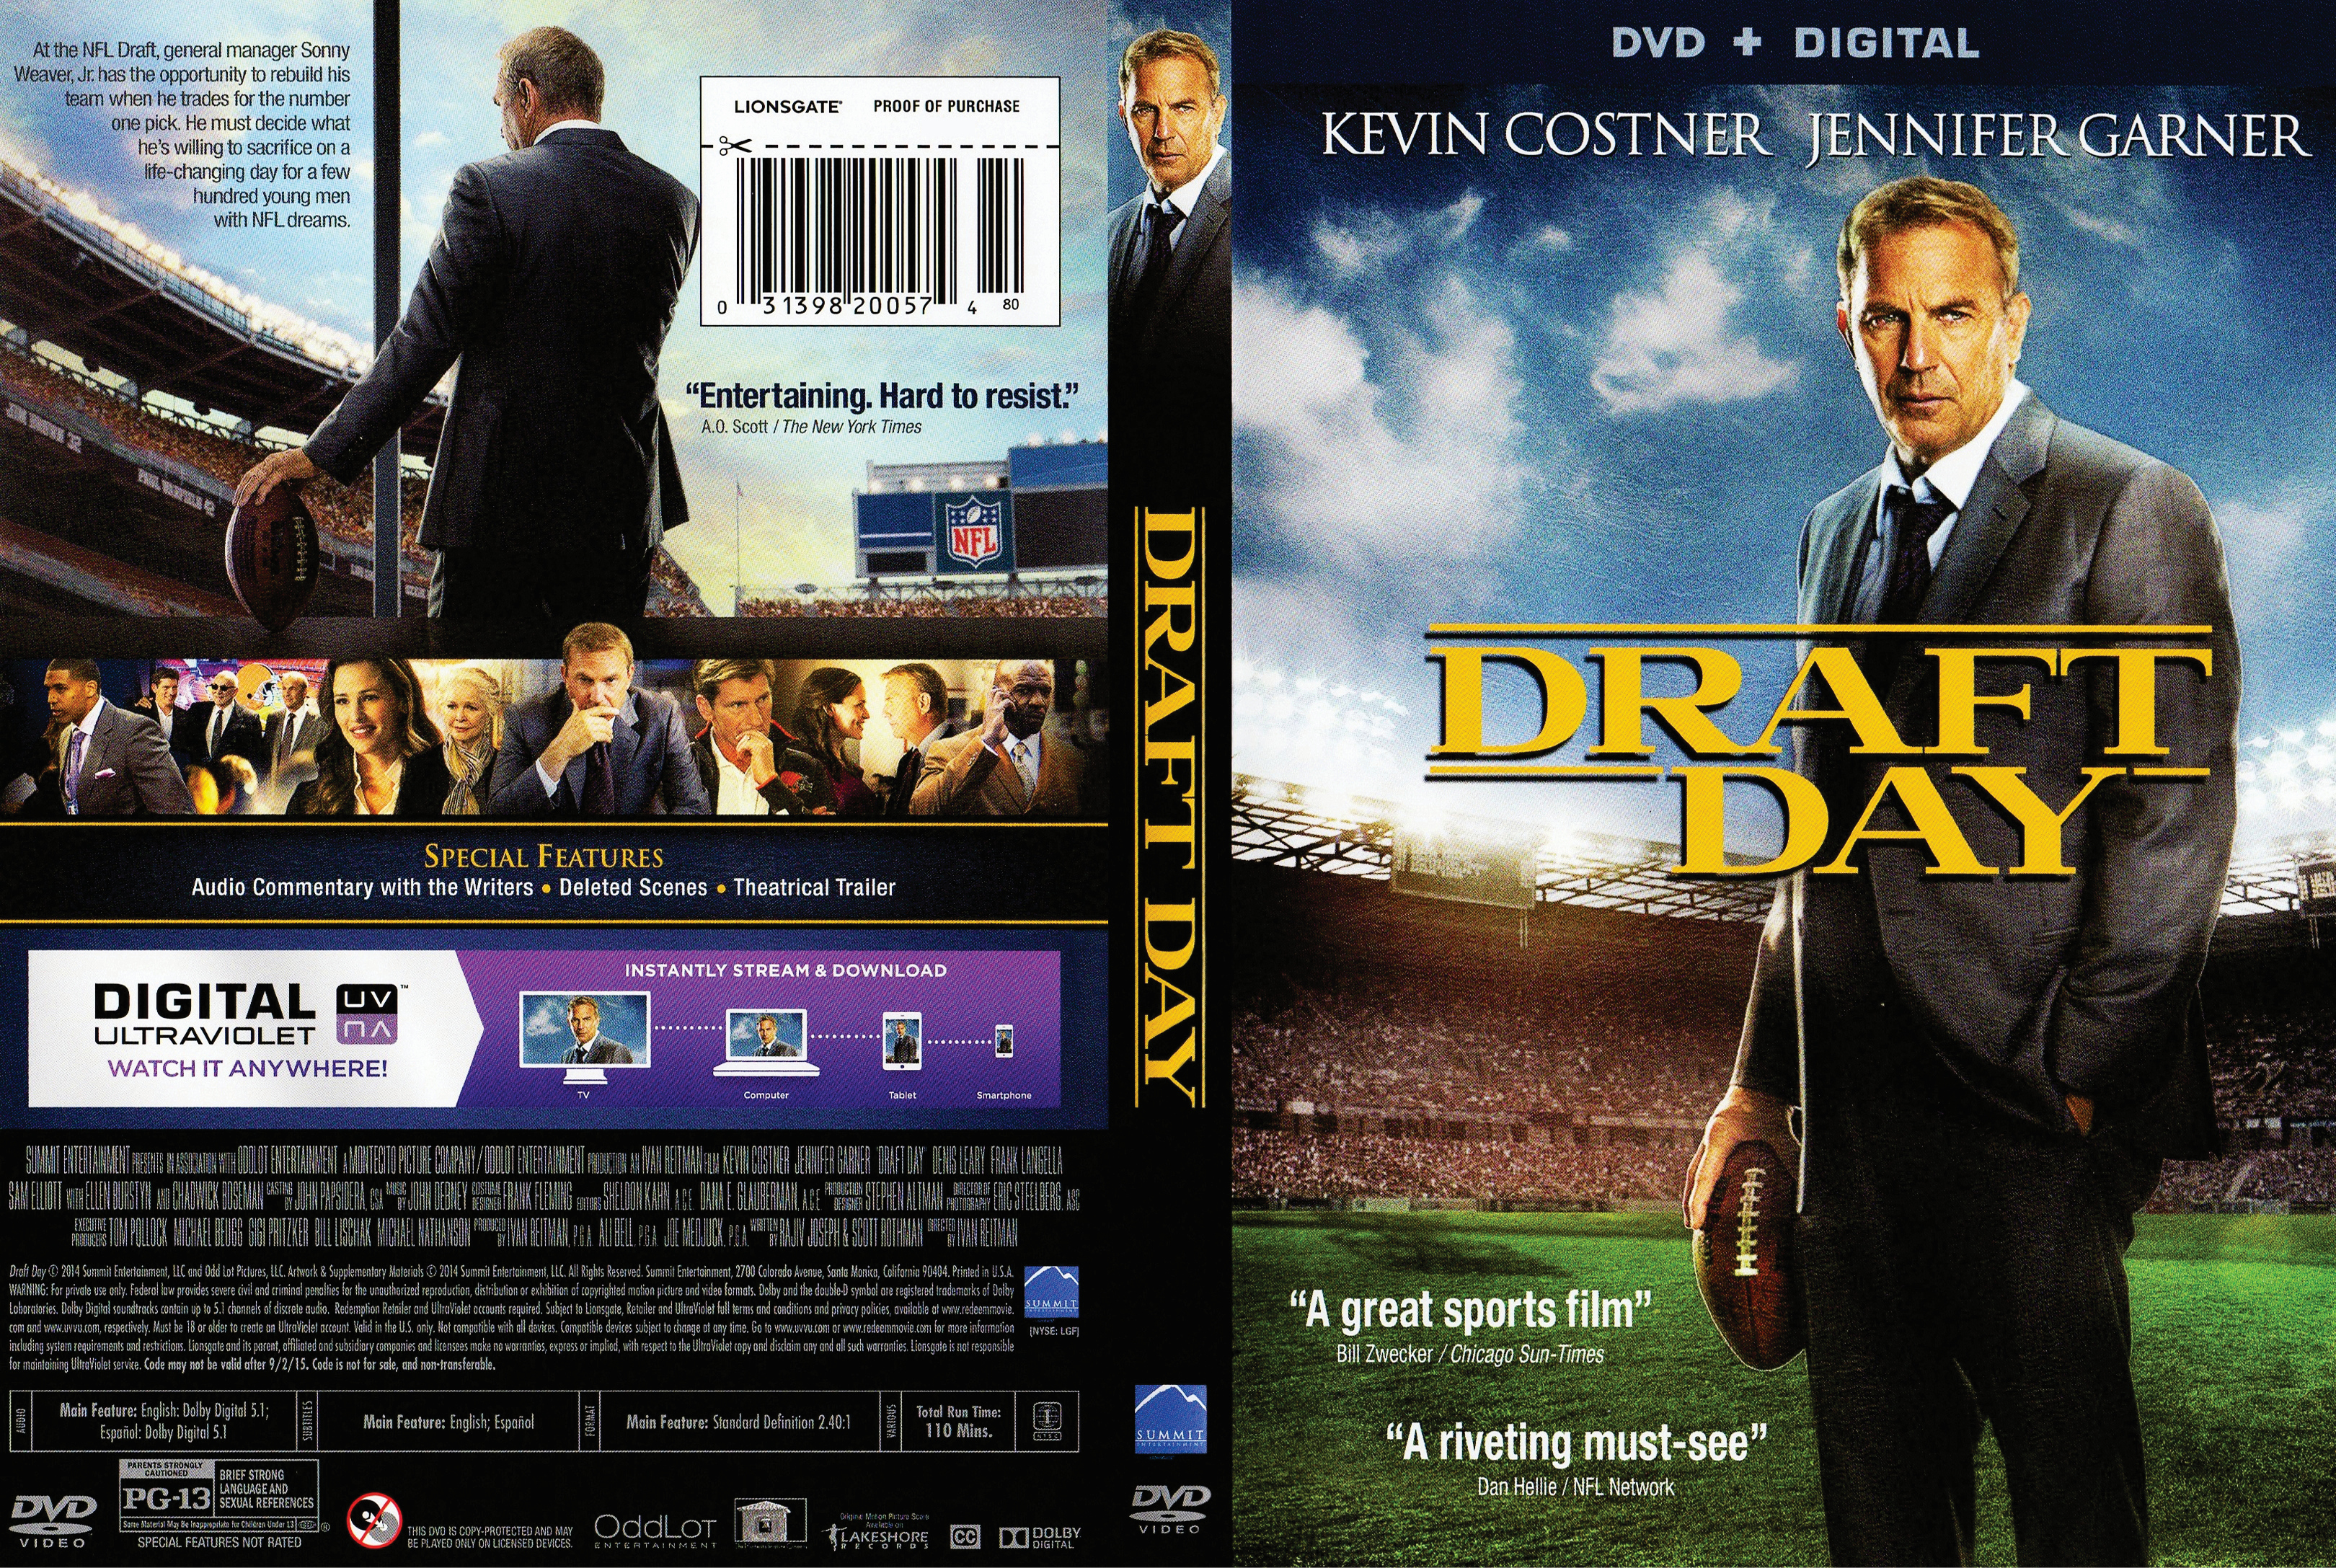 Jaquette DVD Draft day Zone 1